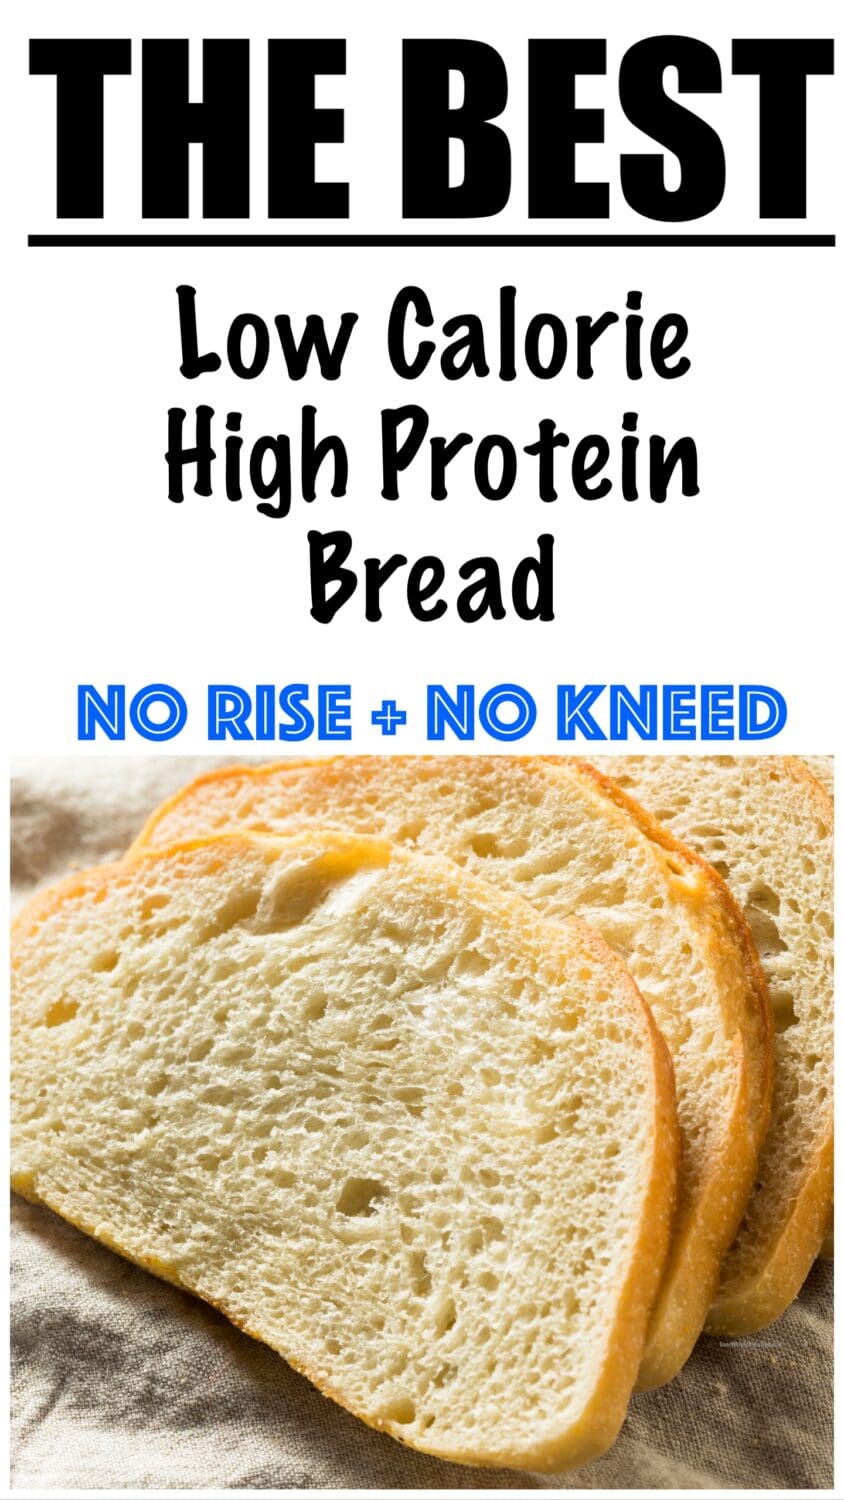 Low Calorie High Protein Bread